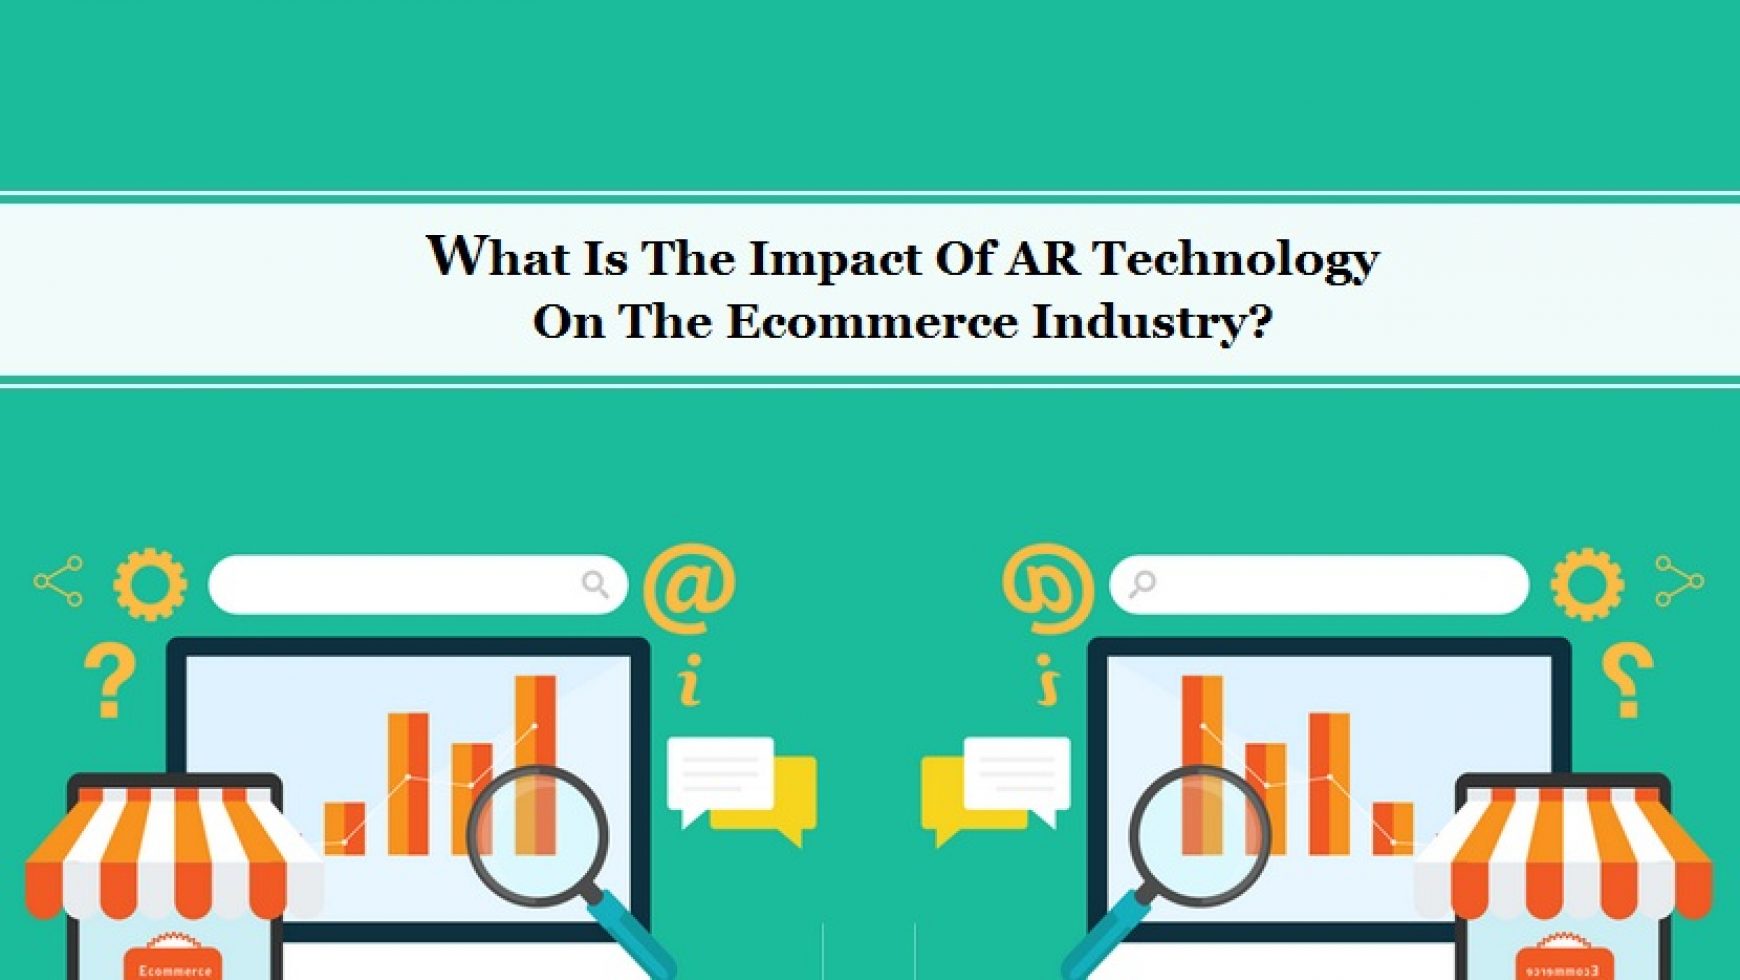 What Is The Impact Of AR Technology On The Ecommerce Industry?